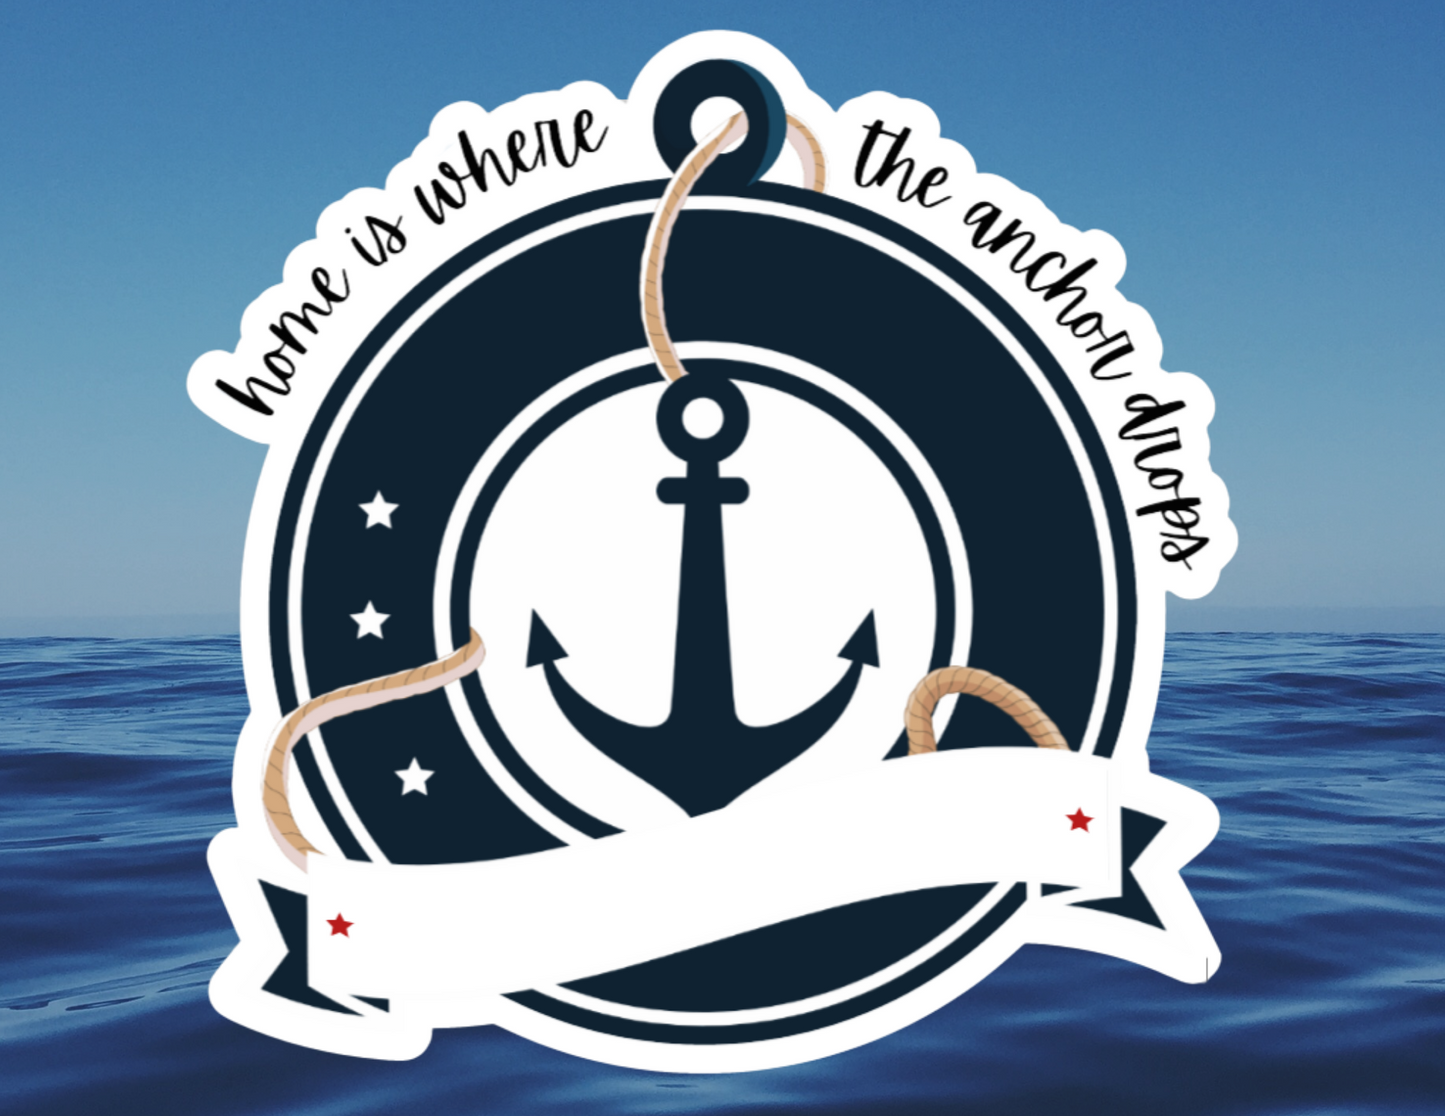 Home is Where the Anchor Drops Whiteboard Magnet